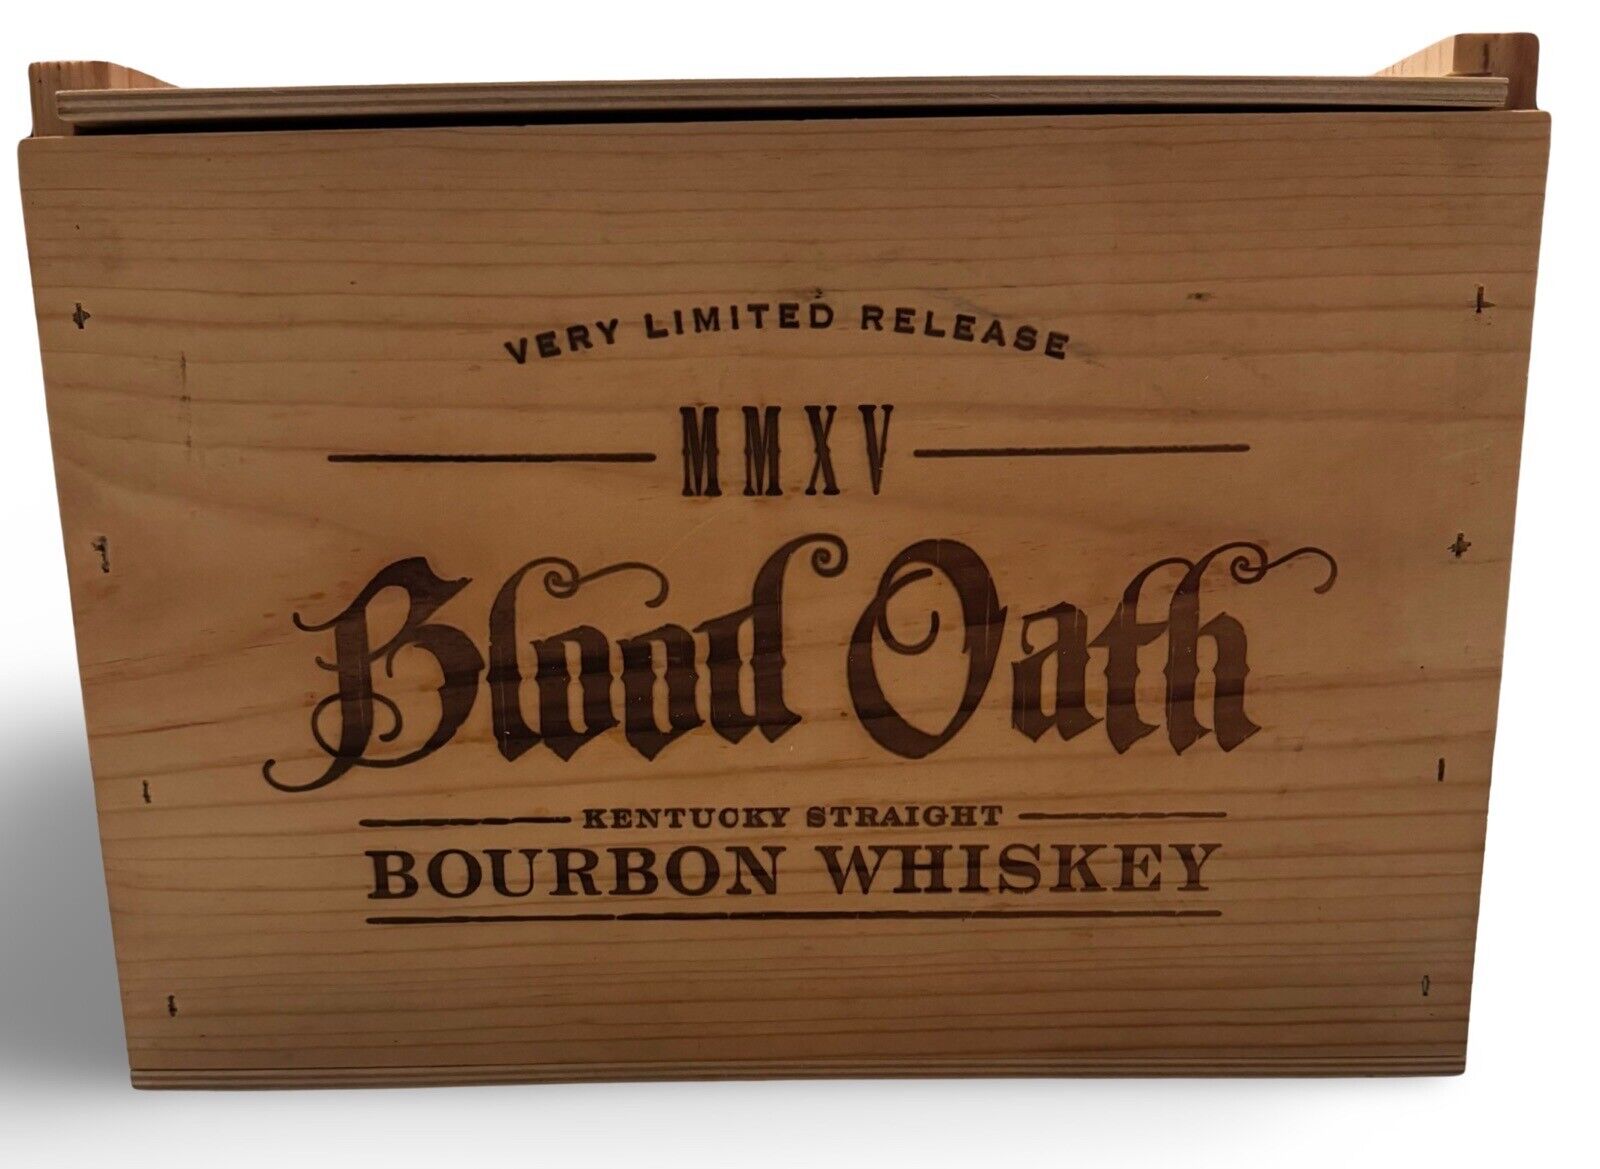 Blood Oath Pact 1 Bourbon Wooden Box for 3 Bottles...Very Rare